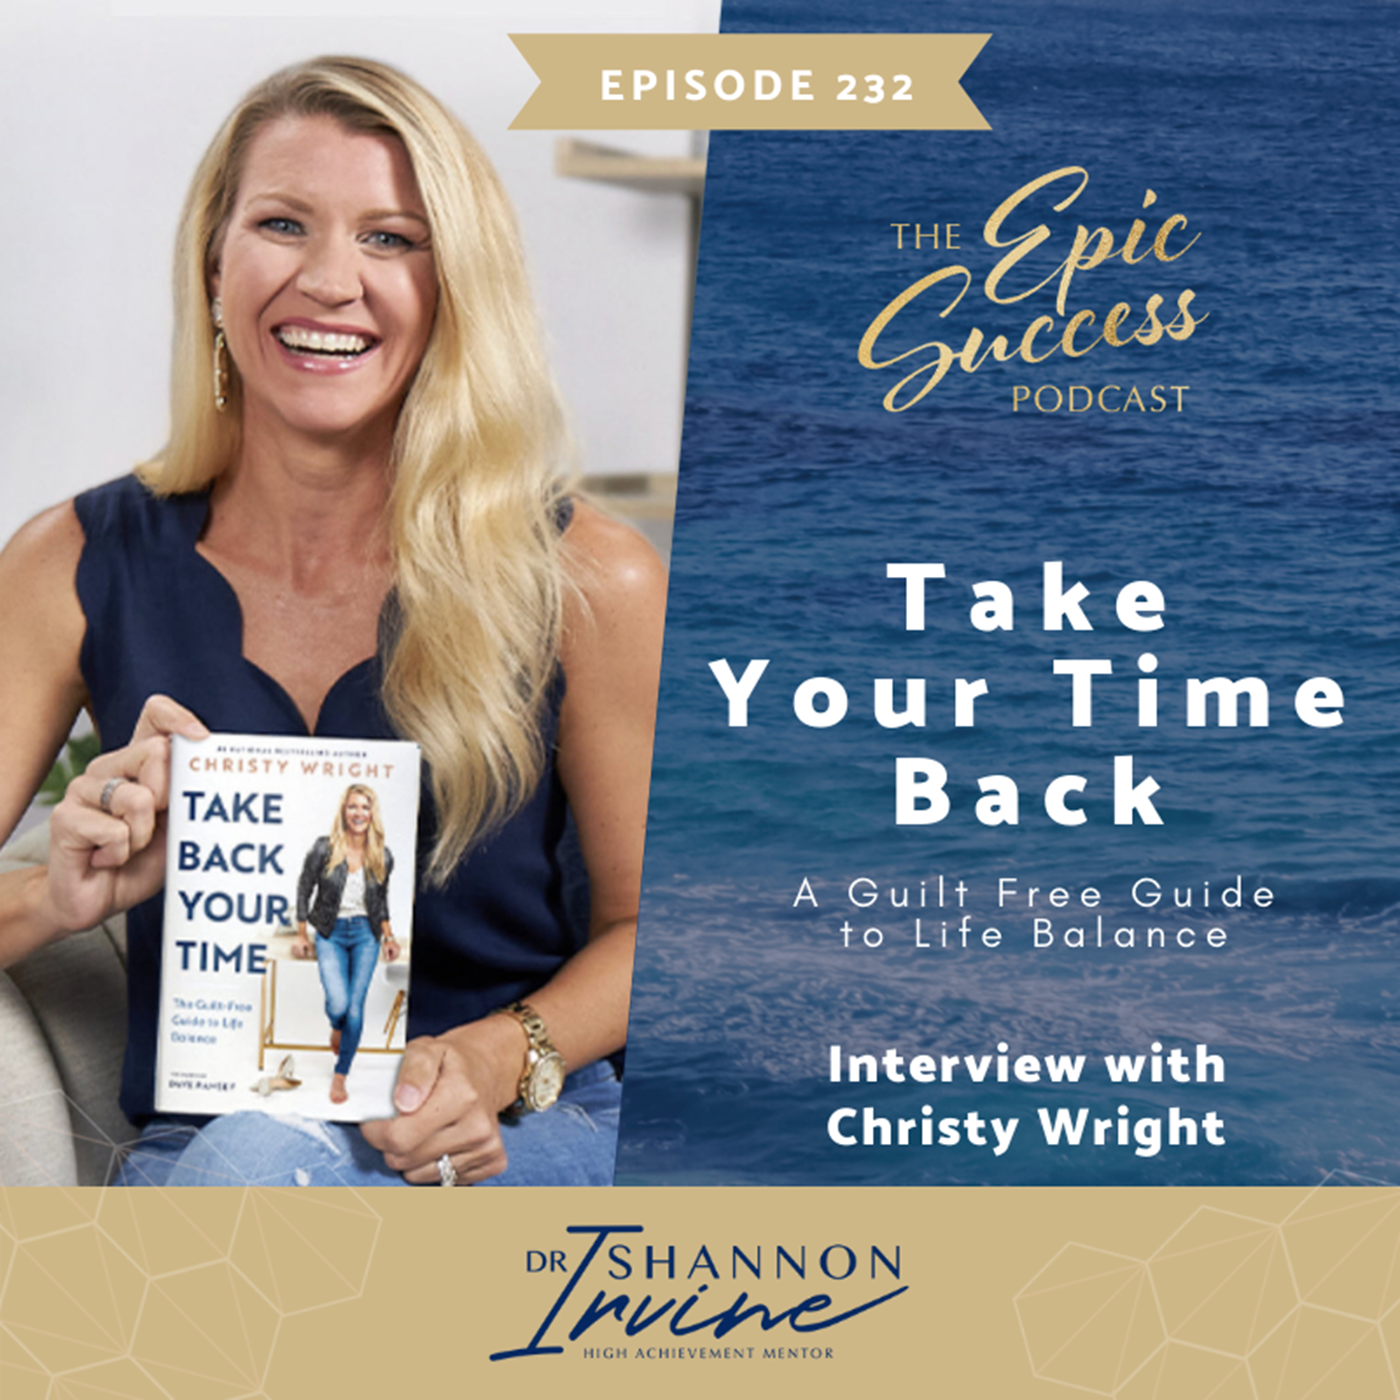 Take Your Time Back A Guilt Free Guide to Life Balance with Christy